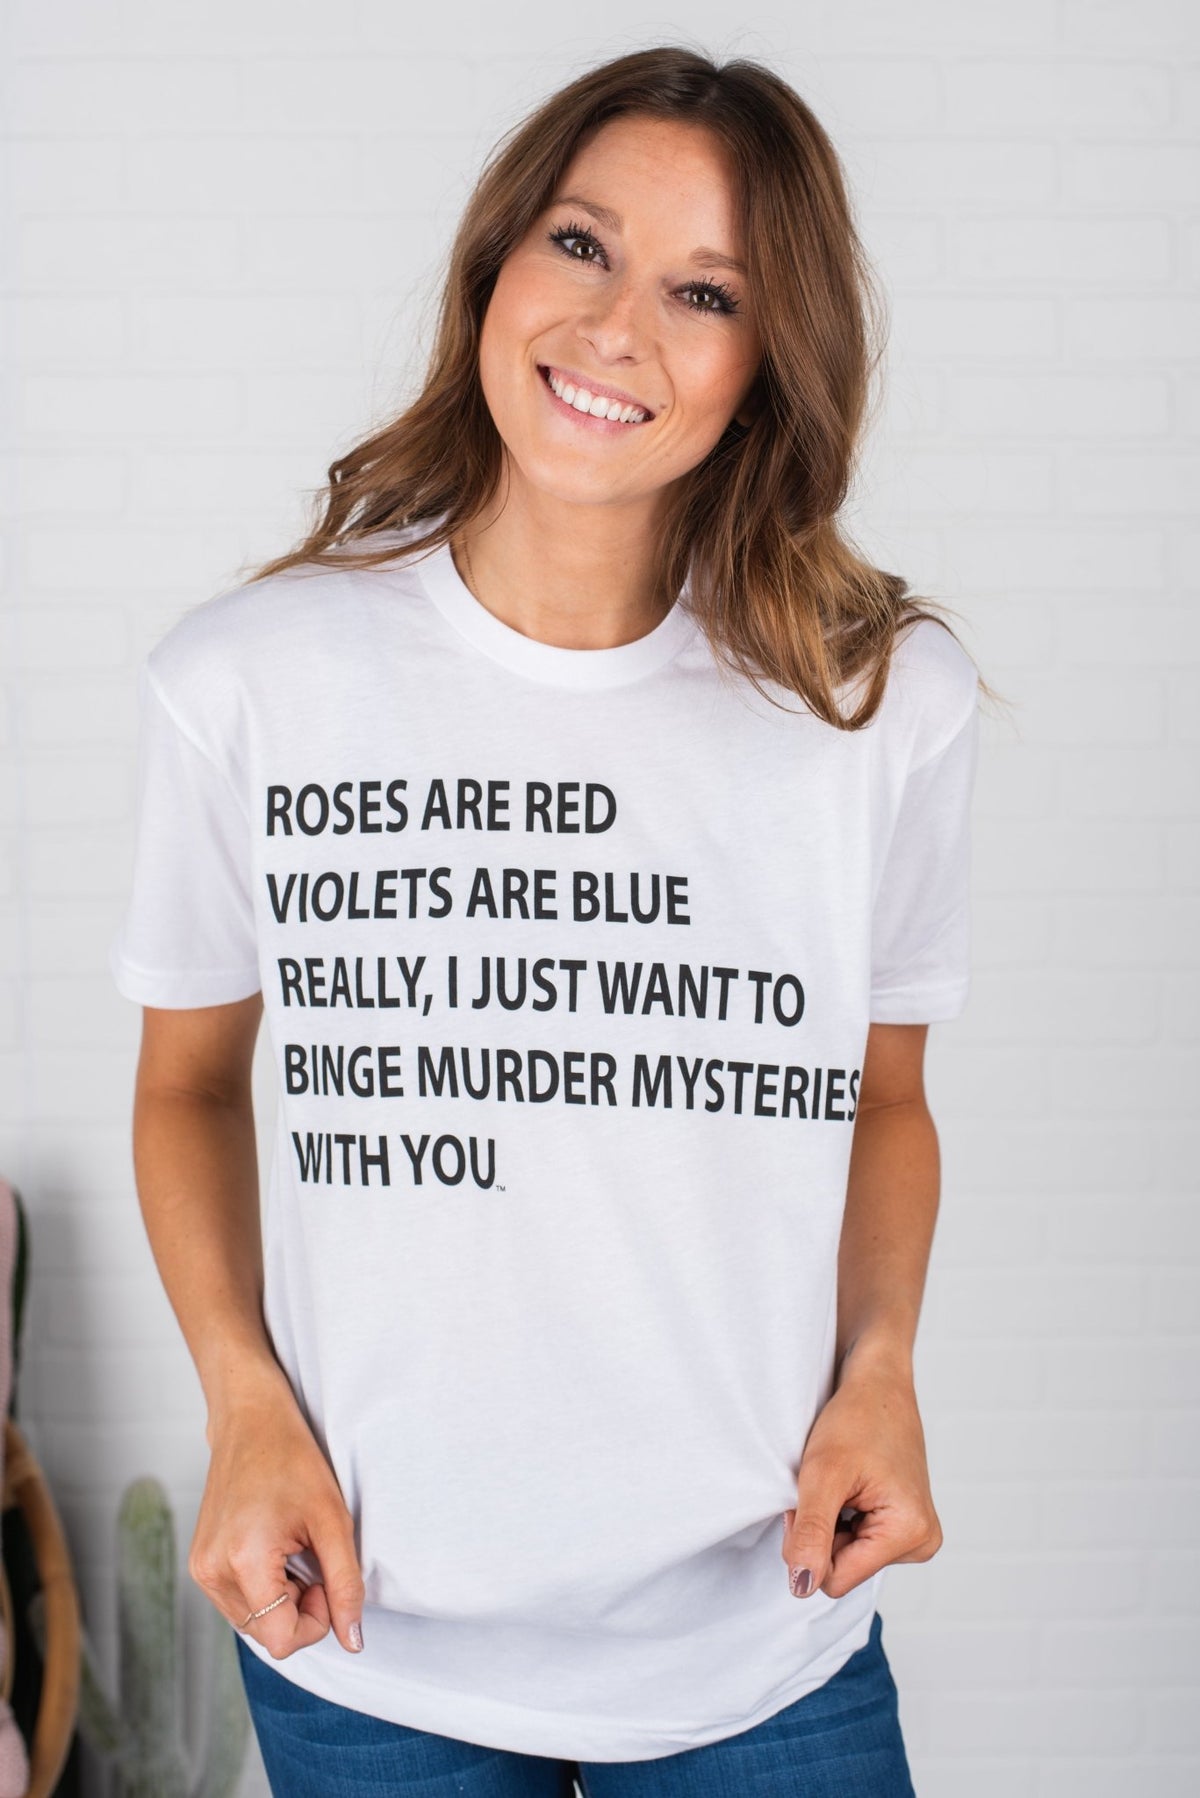 Murder mystery unisex short sleeve t-shirt white - Stylish T-shirts - Trendy Graphic T-Shirts and Tank Tops at Lush Fashion Lounge Boutique in Oklahoma City